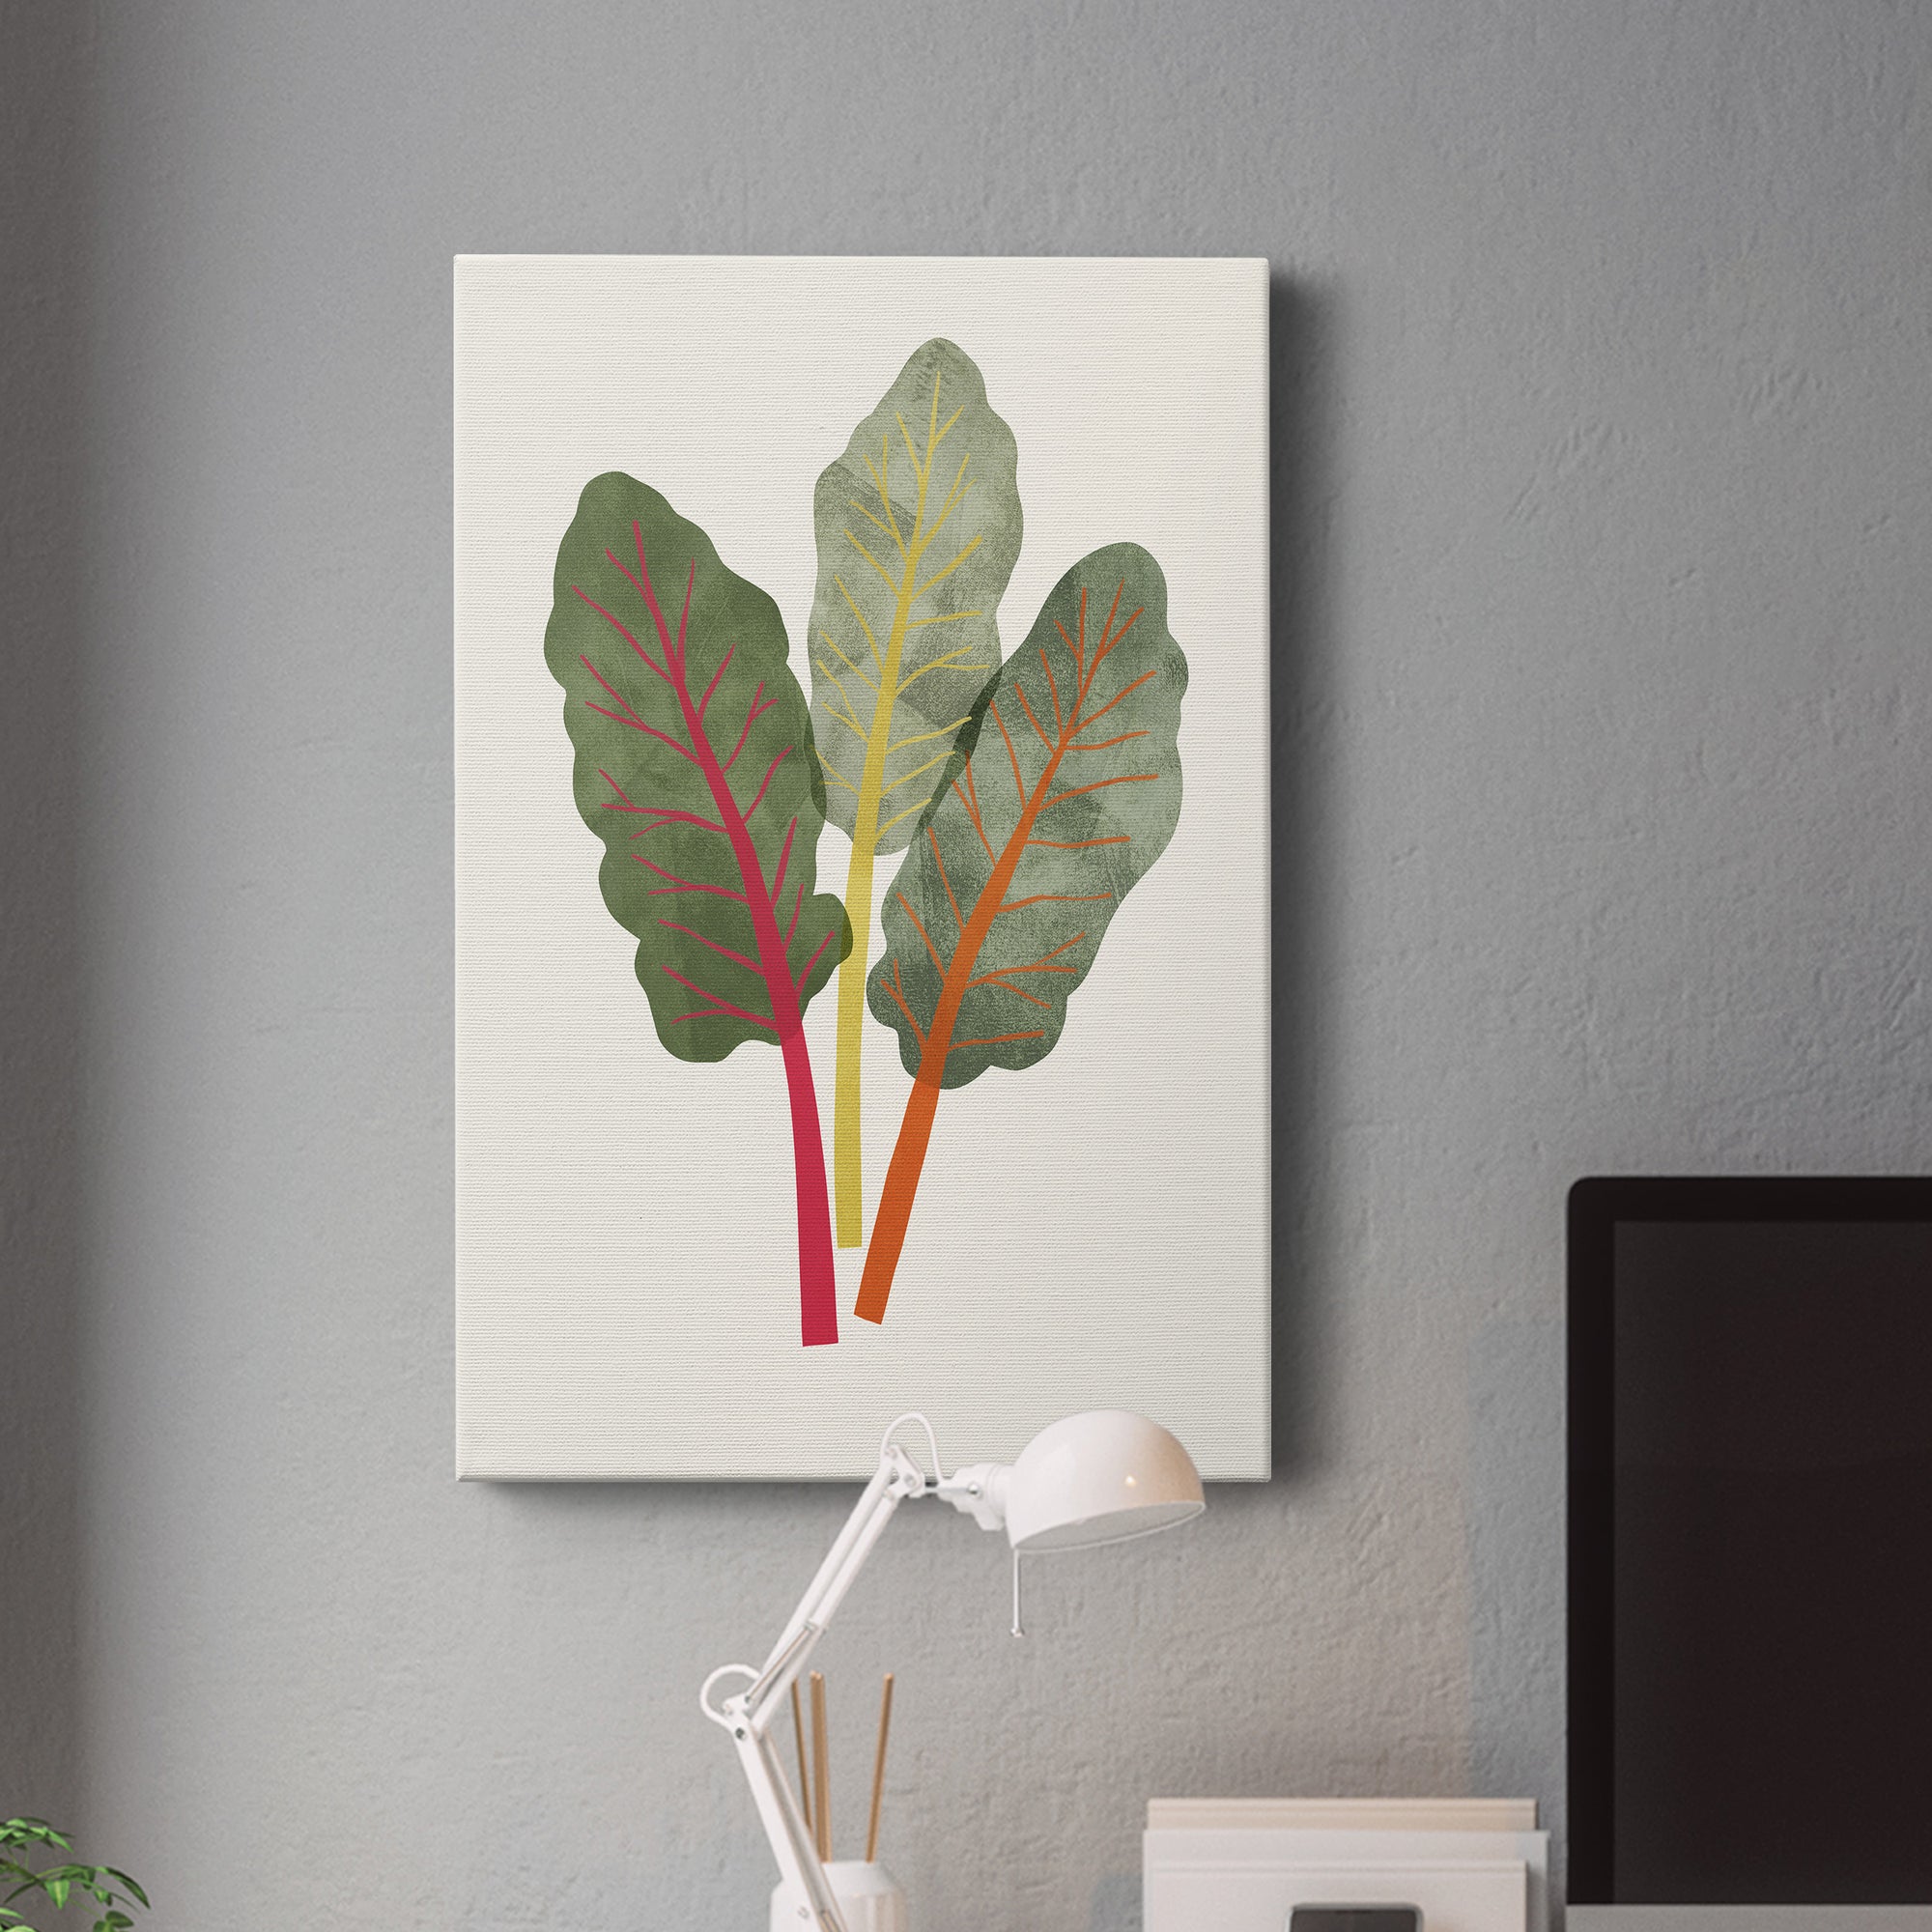 Organic Veg V Premium Gallery Wrapped Canvas - Ready to Hang